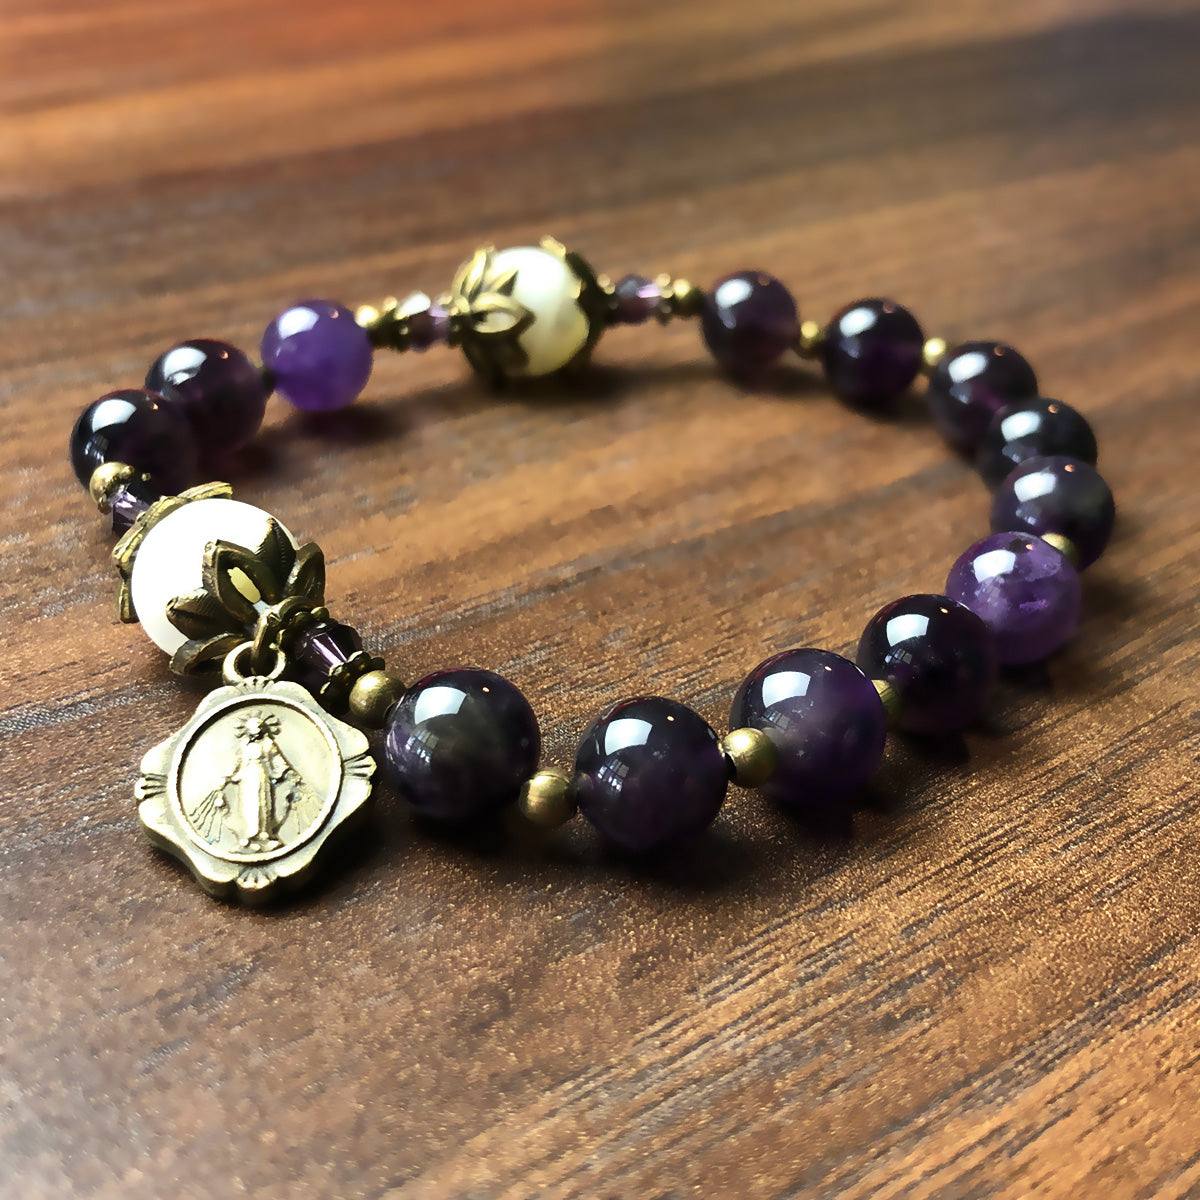 Amethyst and Mother of Pearl Stone Rosary Bracelet by Catholic Heirlooms - Confirmation - Holy Communion Gift